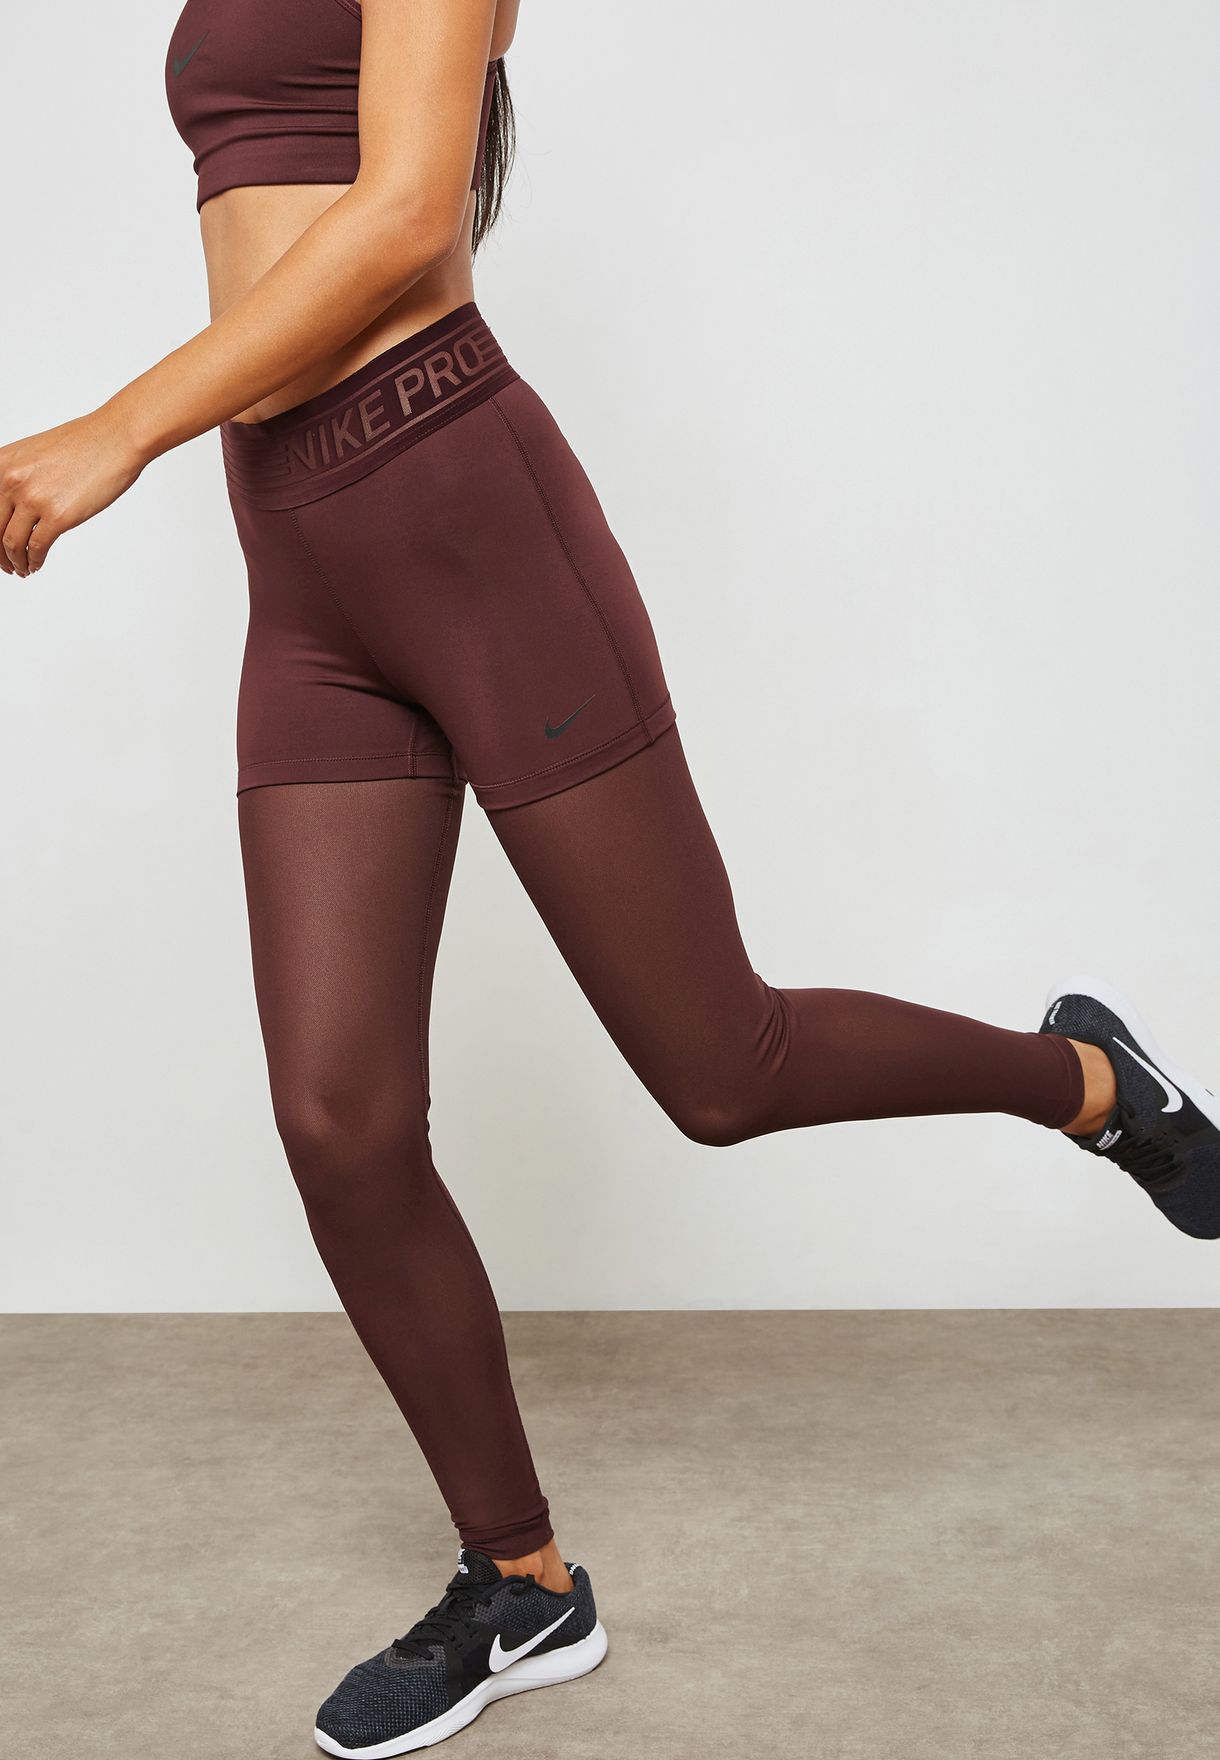 nike women's pro deluxe tights